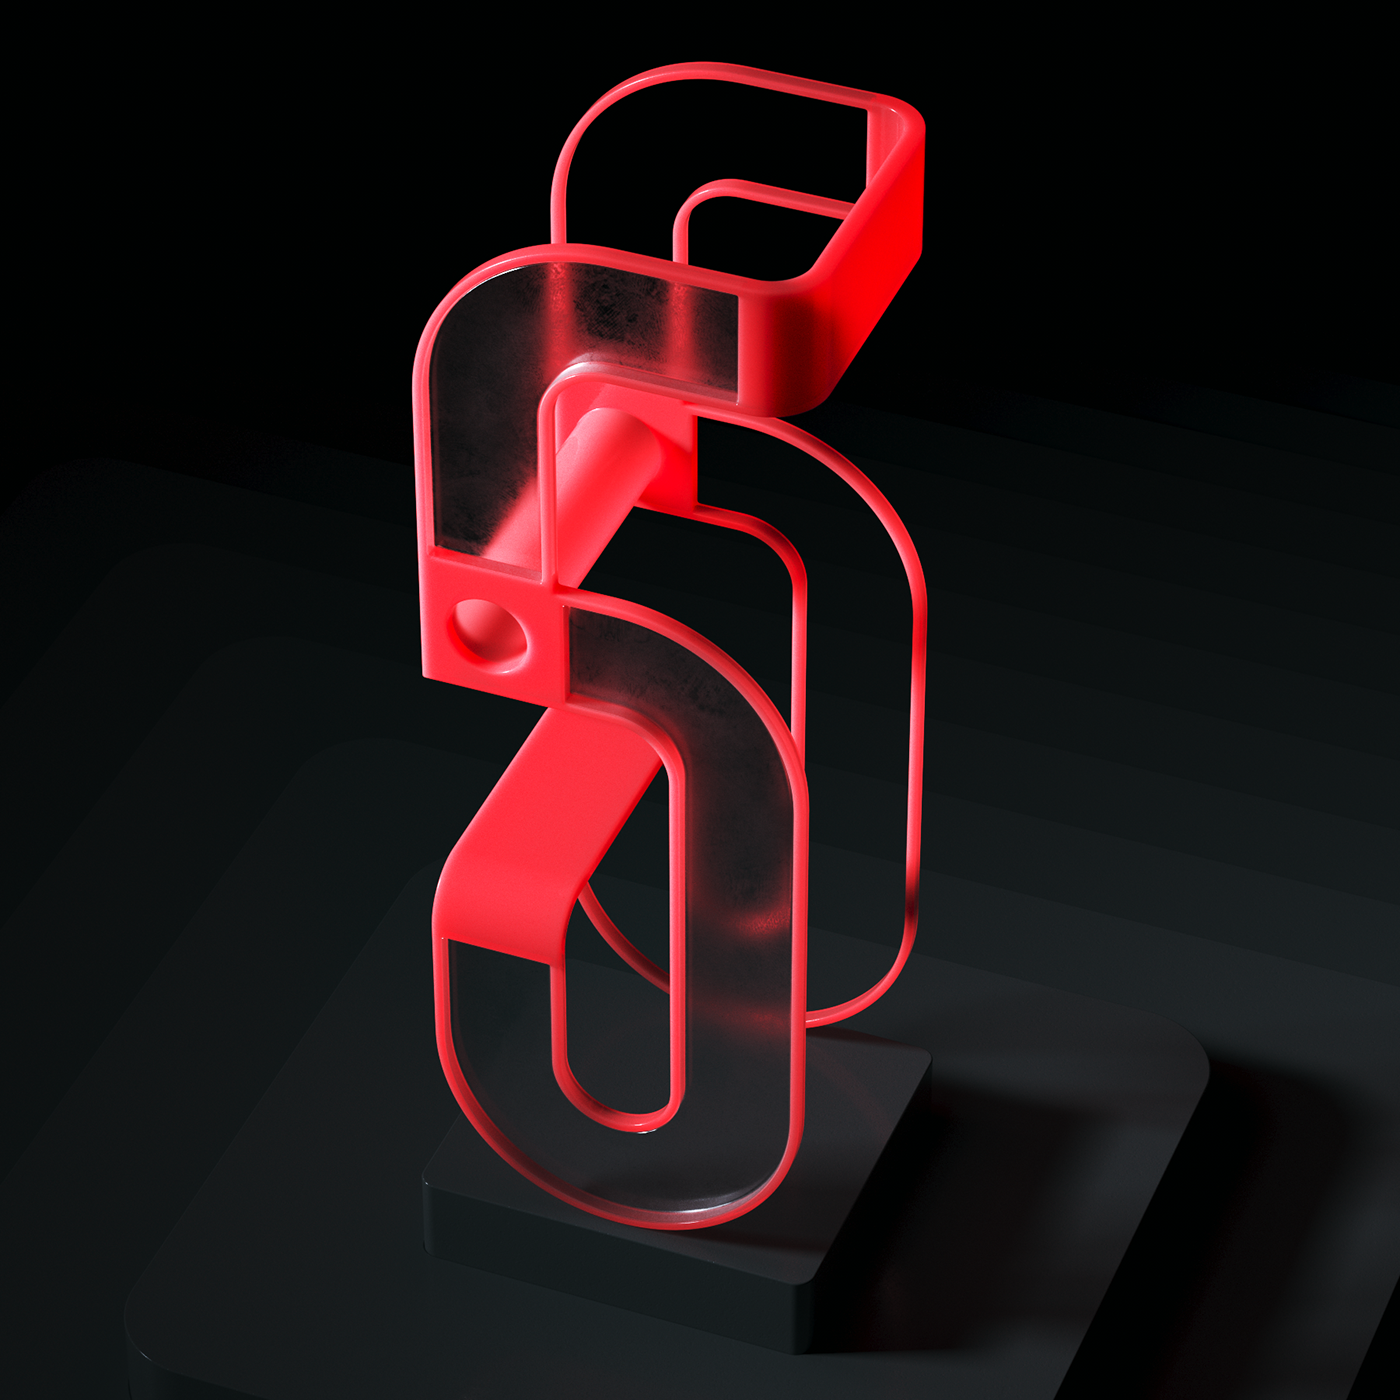 3D CGI 3DType type lettering 36DOT 36daysoftype font minimal abstract